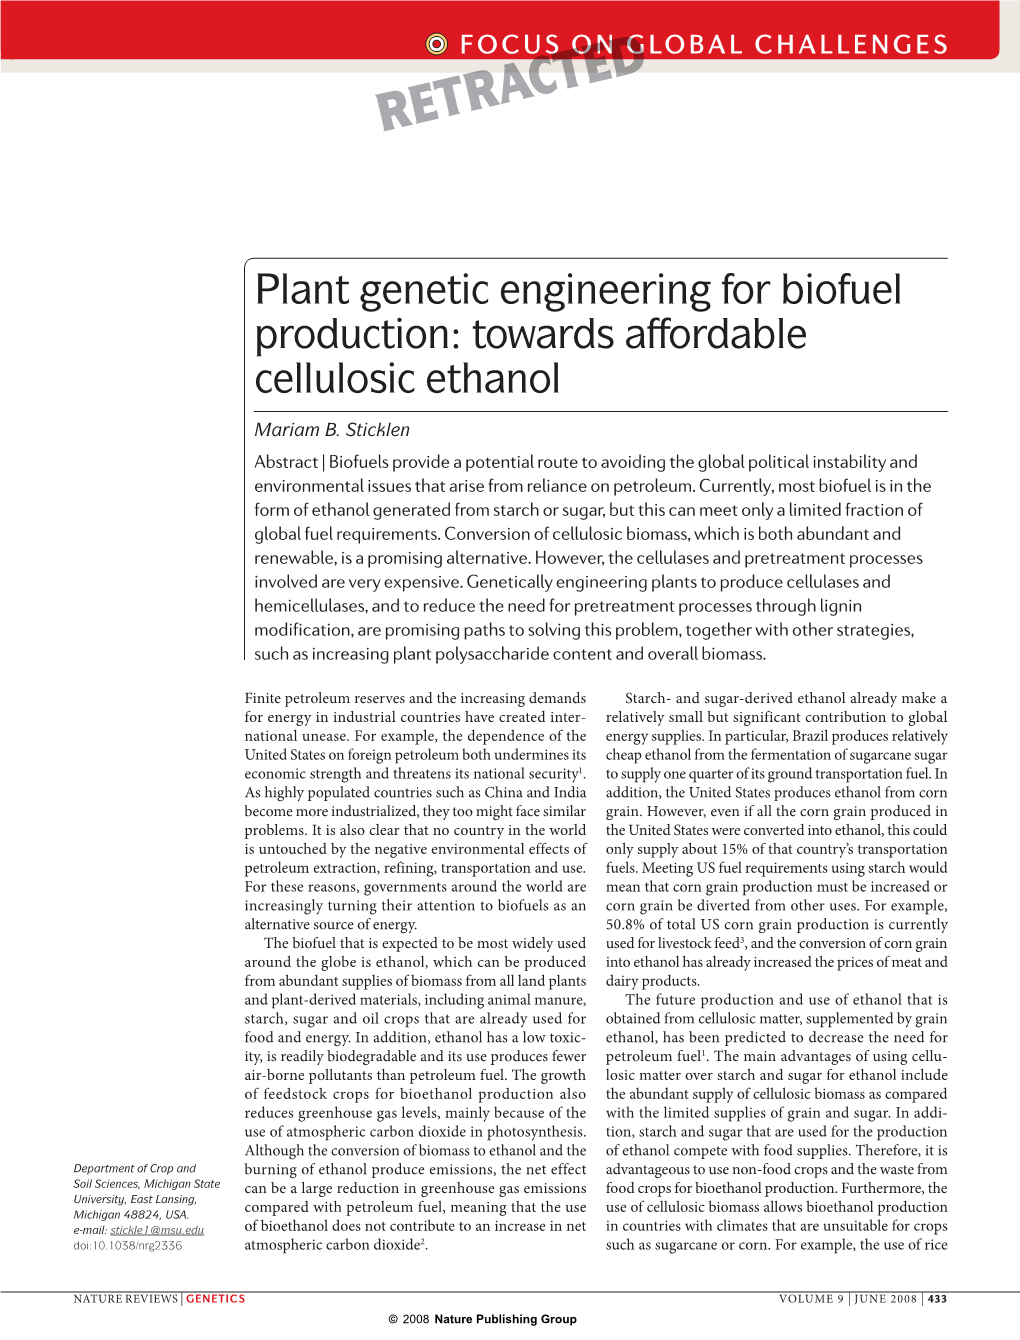 Plant Genetic Engineering for Biofuel Production: Towards Affordable Cellulosic Ethanol